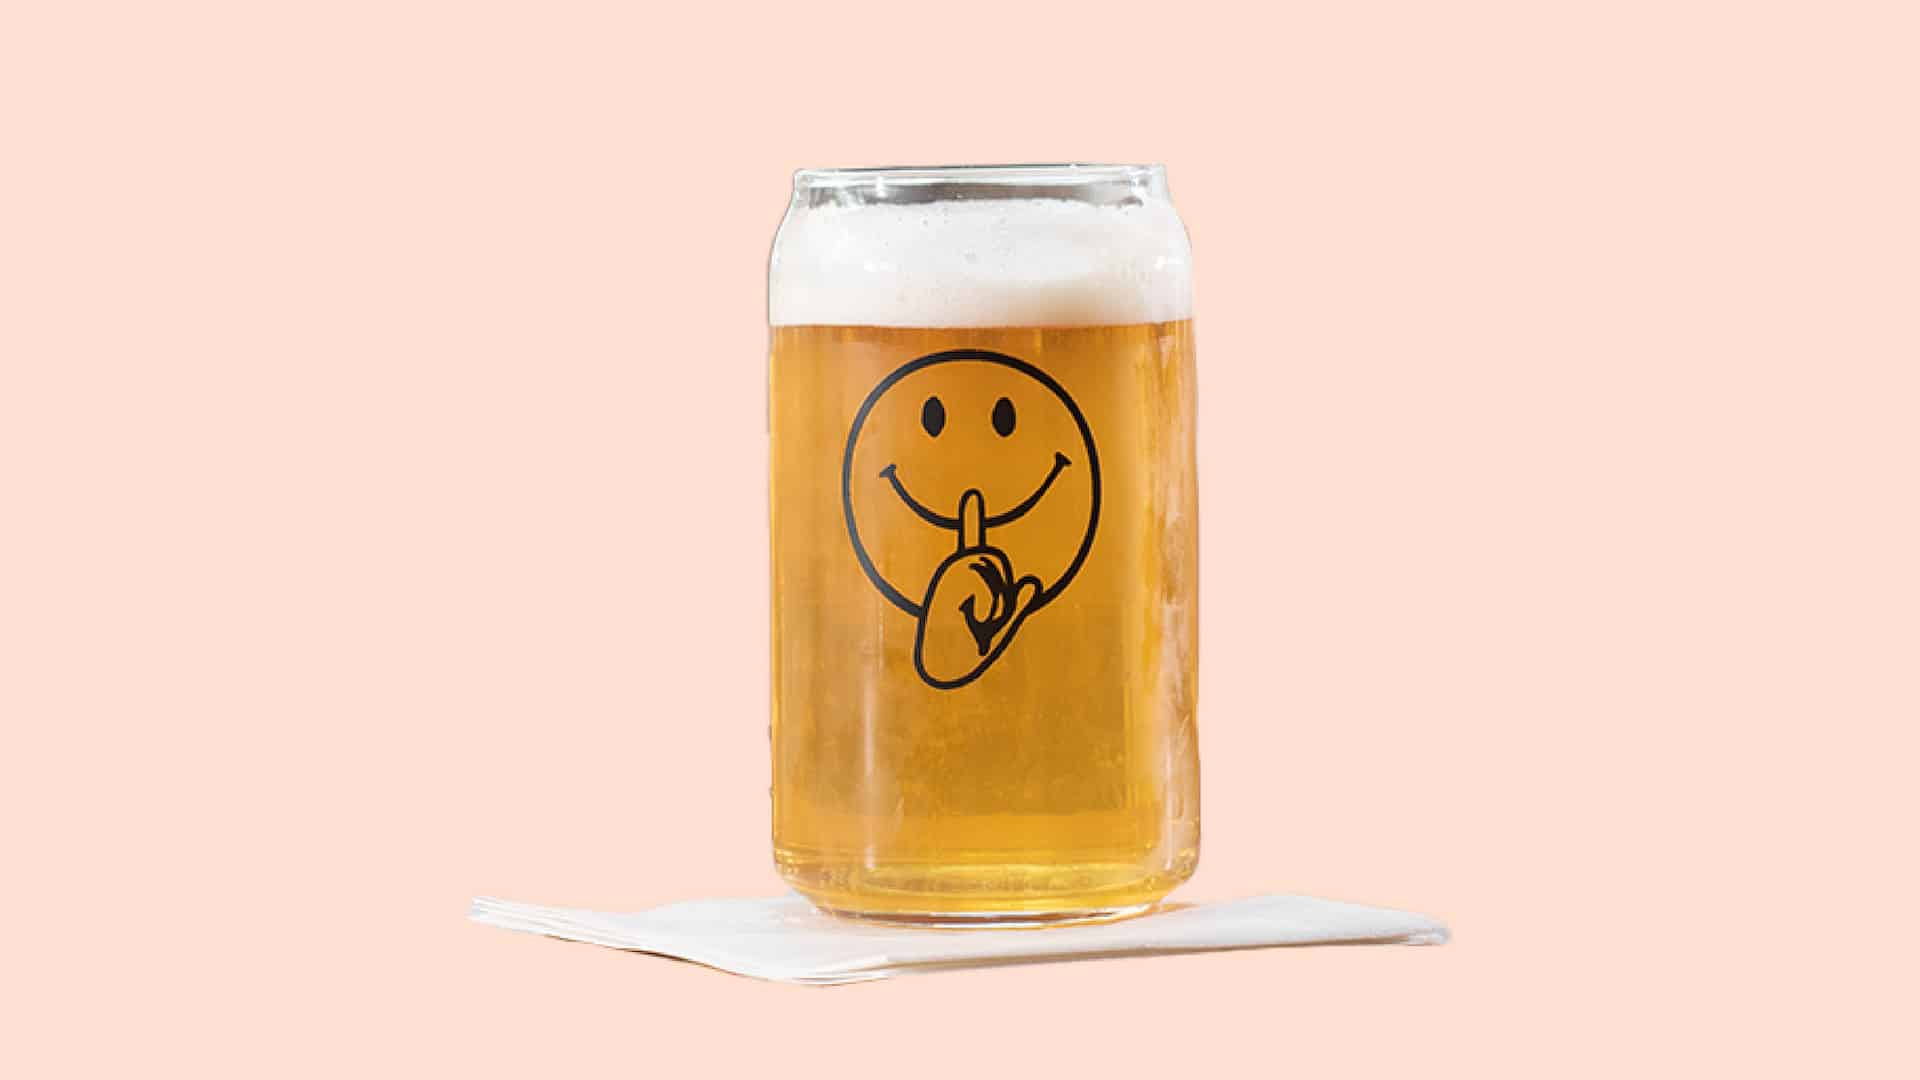 A smiley face glass